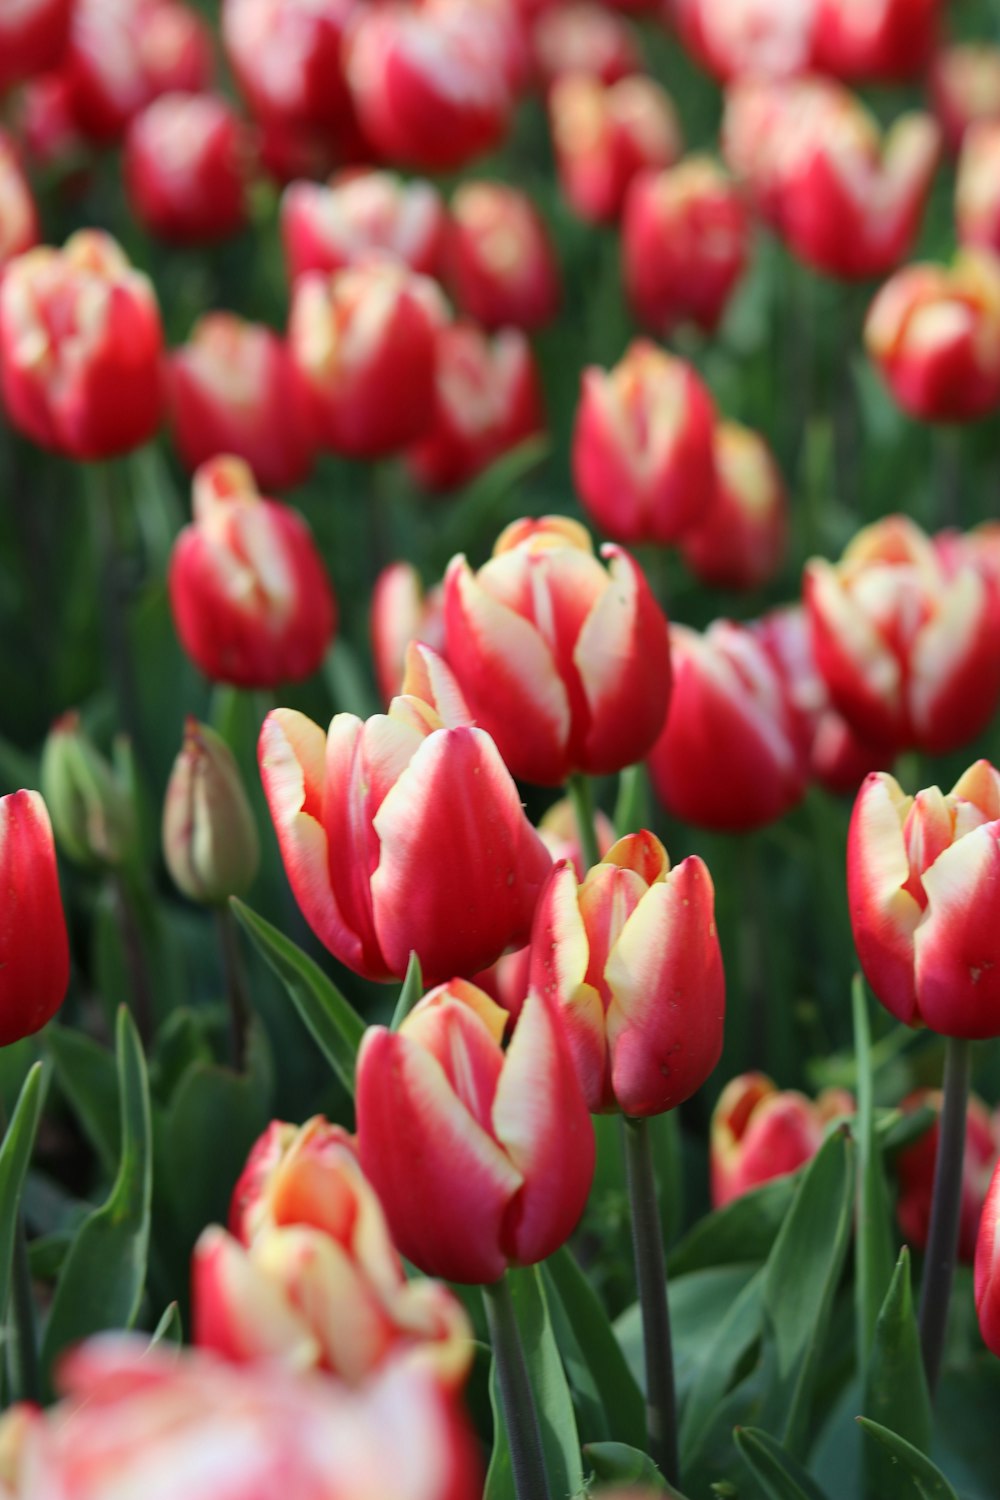 a field of red and white tulips with green leaves